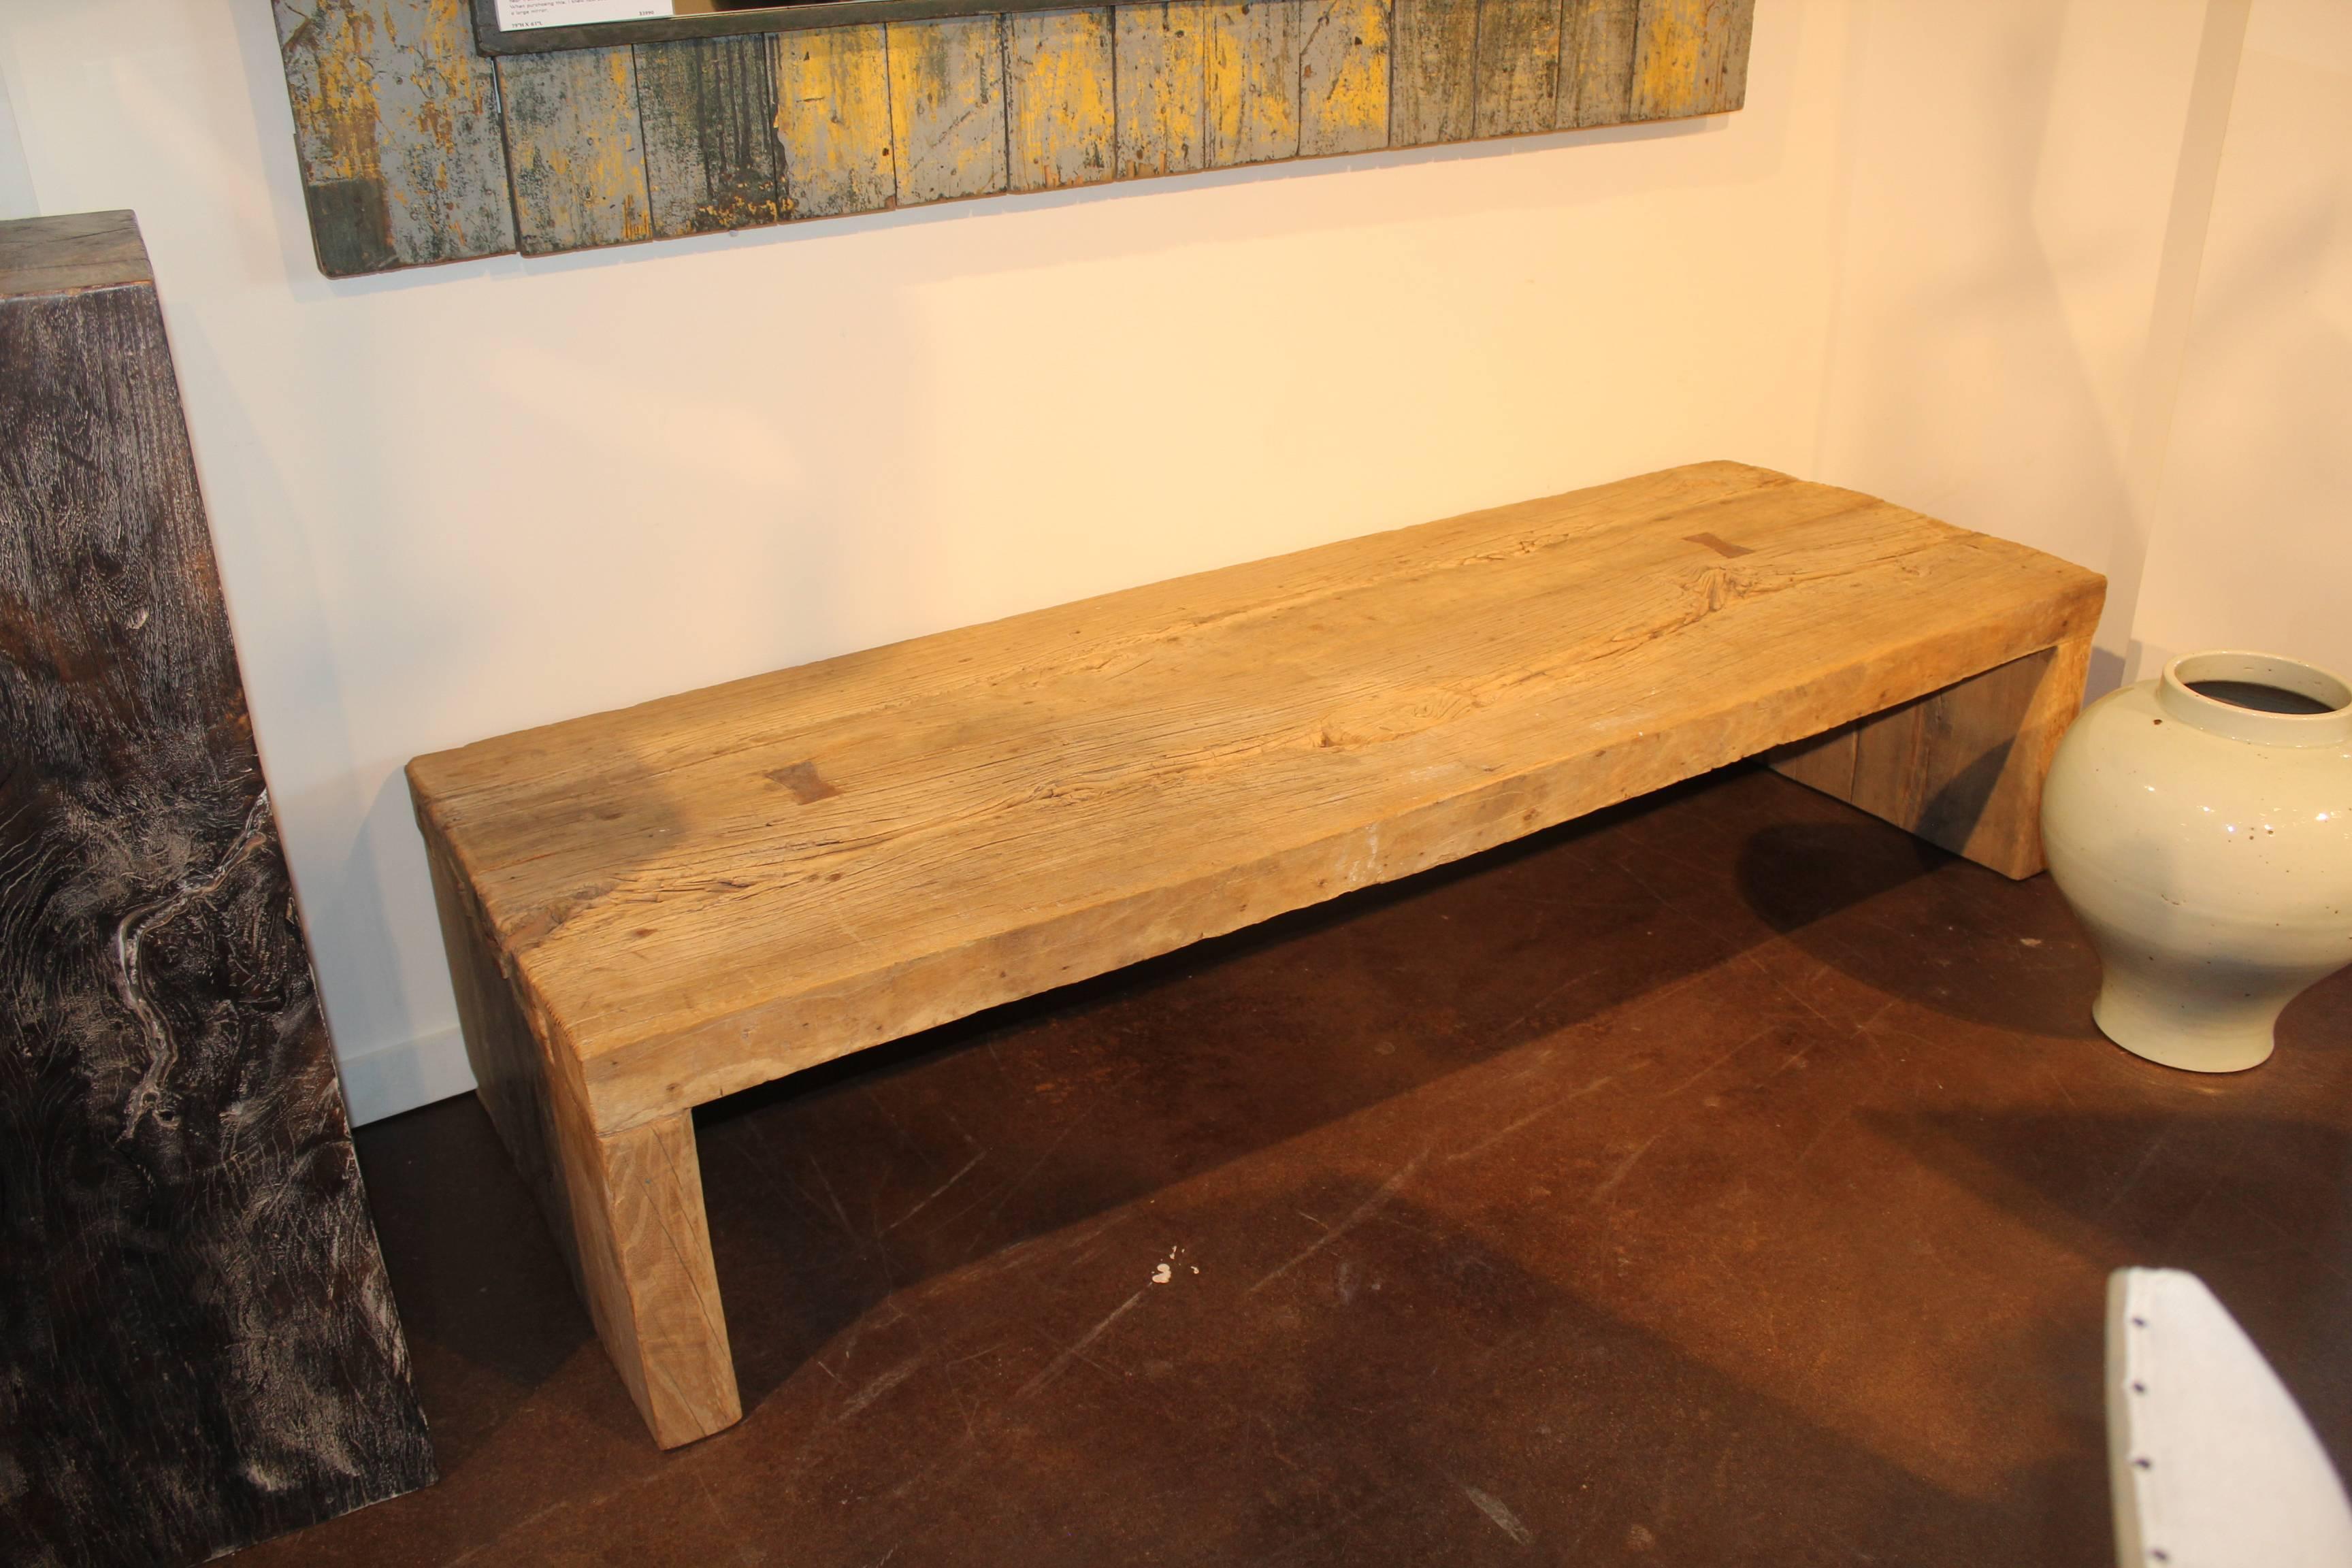 Modern Coffee Table in the Wabi Sabi Aesthetic, Made from Reclaimed Elm